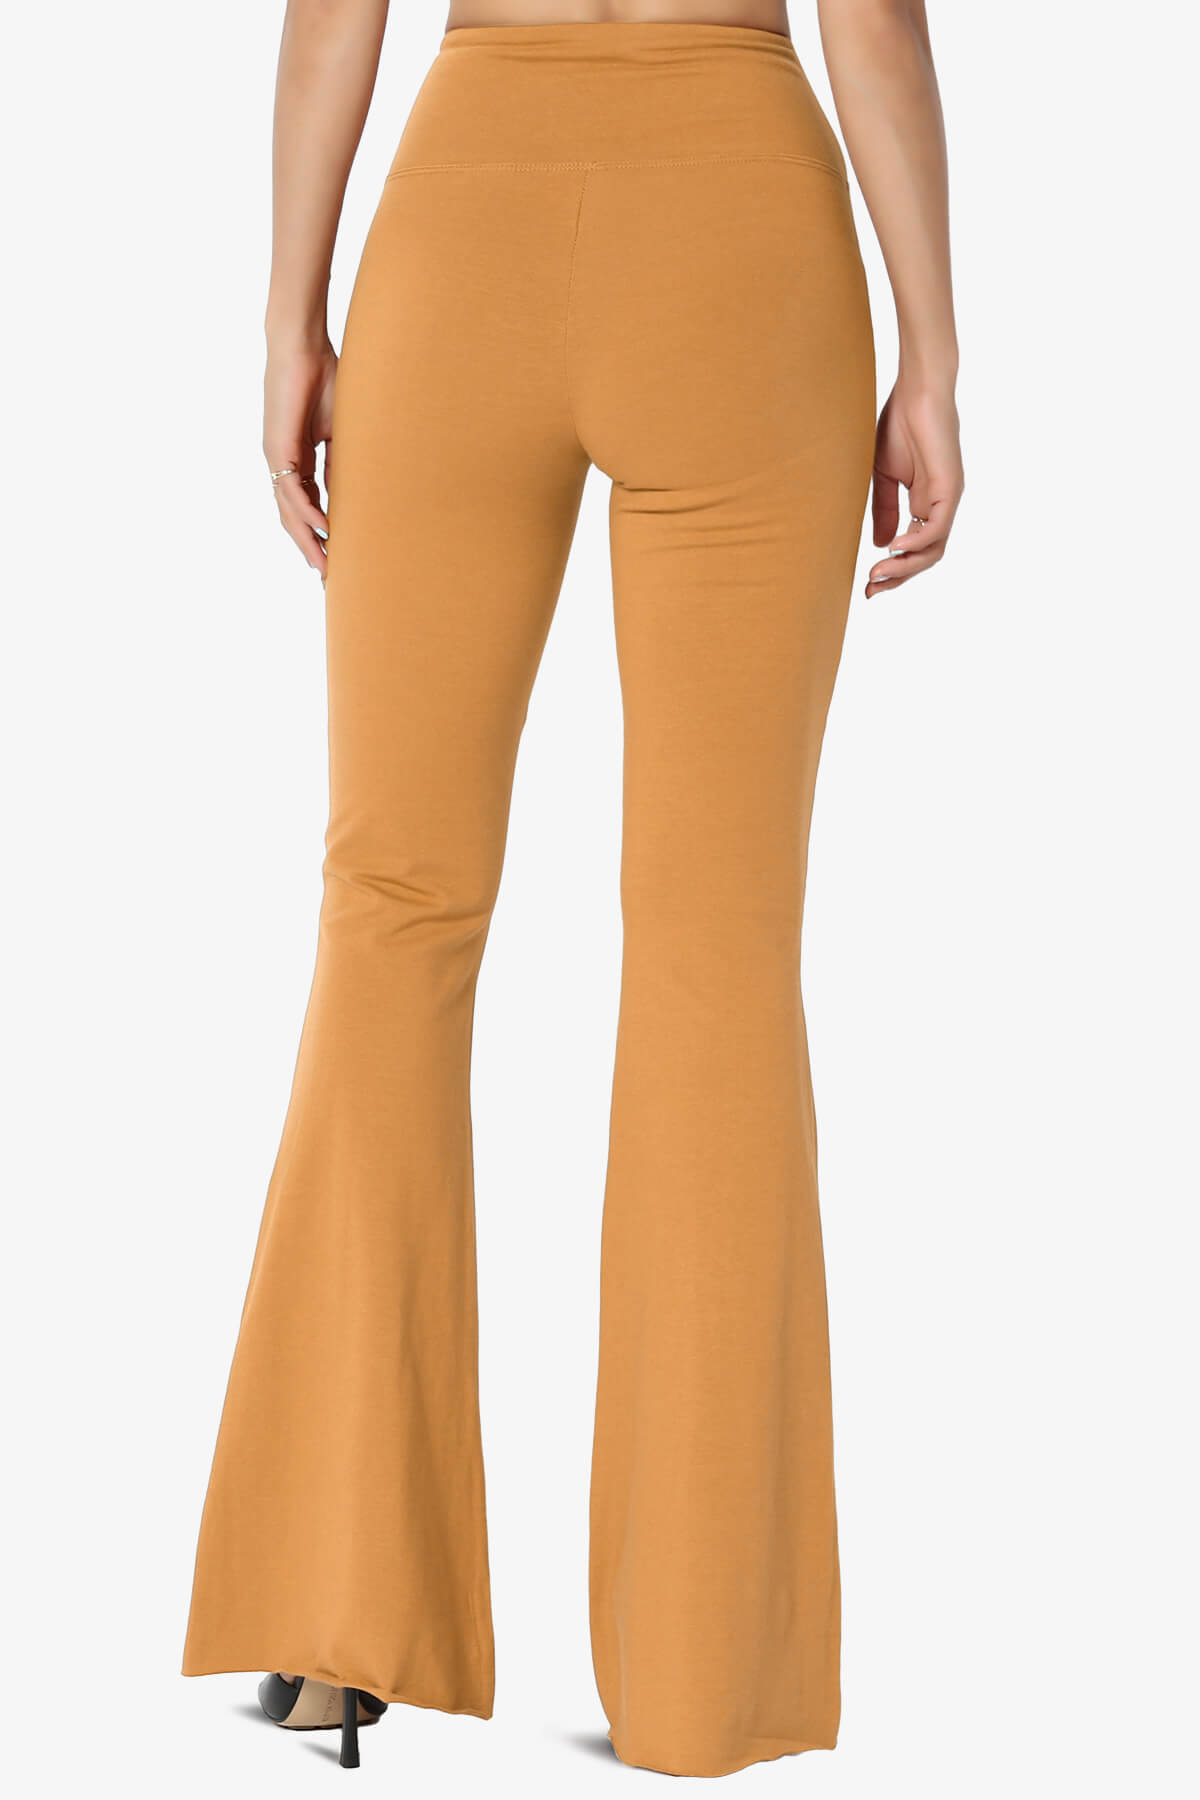 Load image into Gallery viewer, Zaylee Raw Hem Flared Comfy Yoga Pants GOLDEN MUSTARD_2
